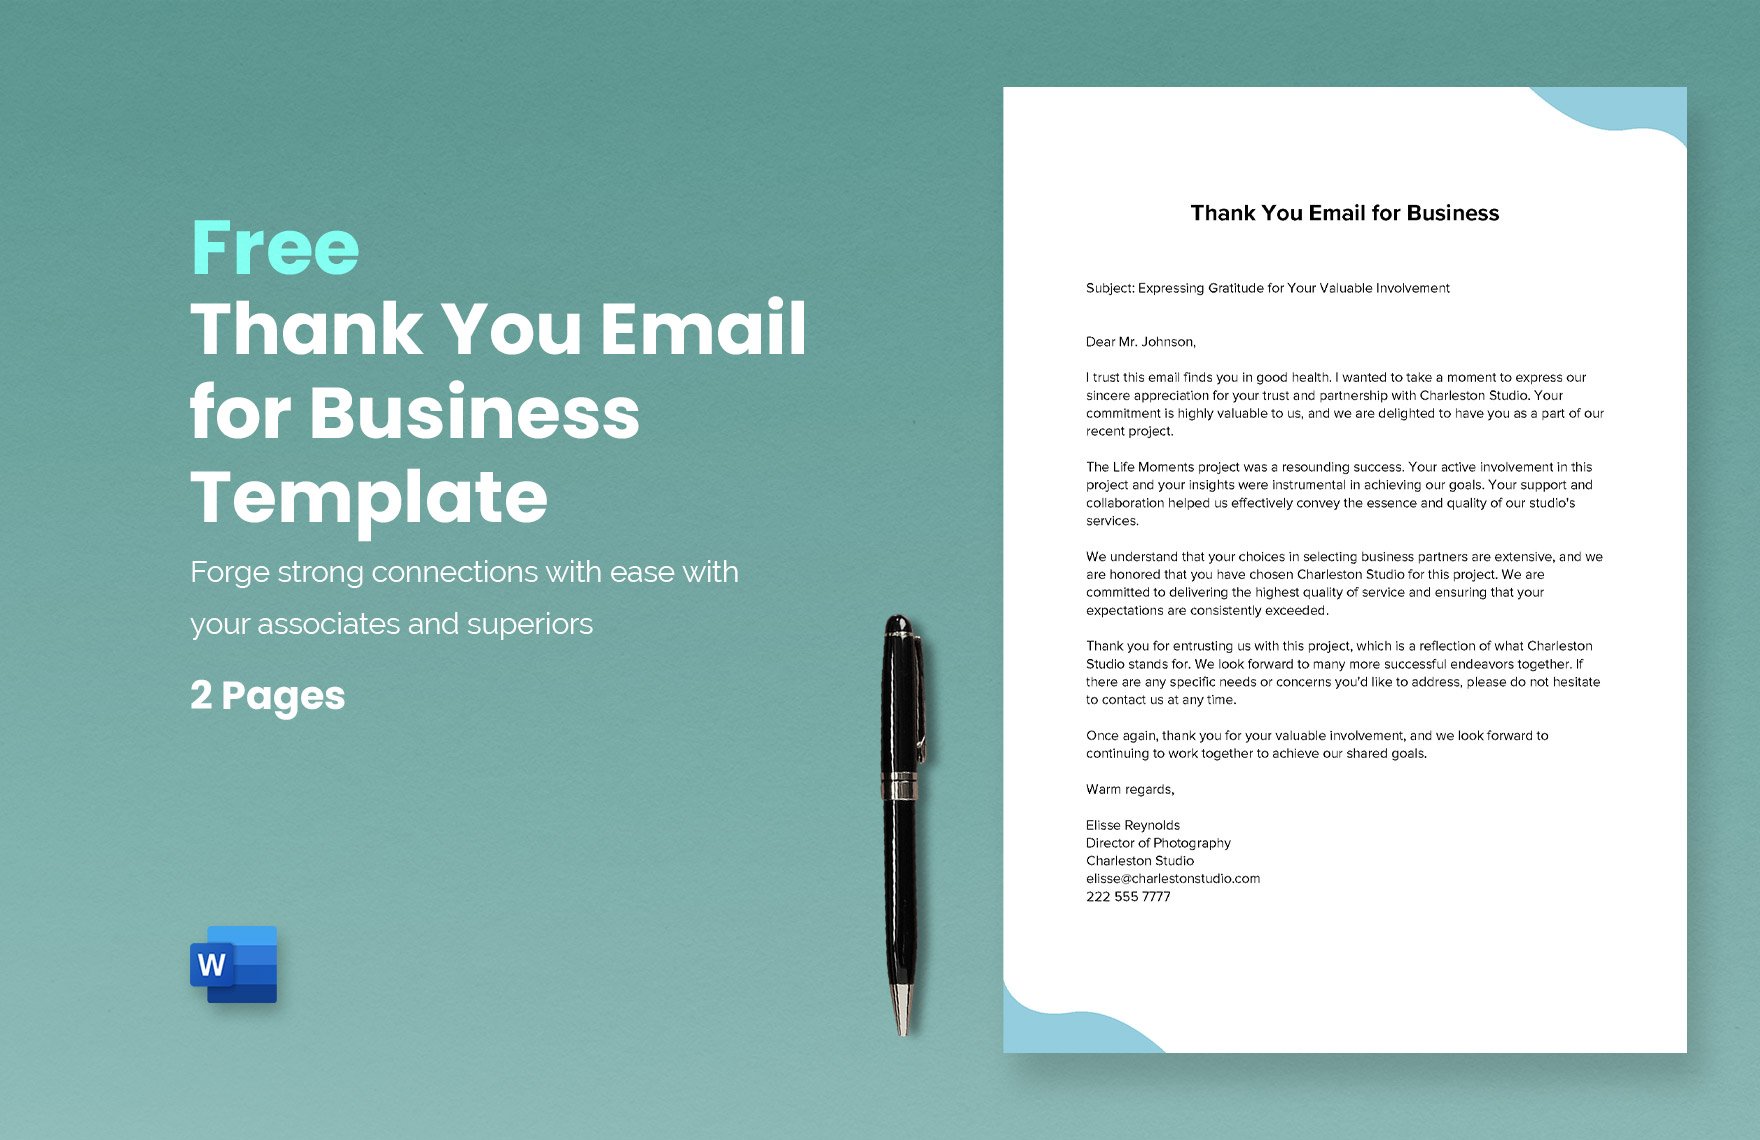 Thank You Email for Business Template in Word